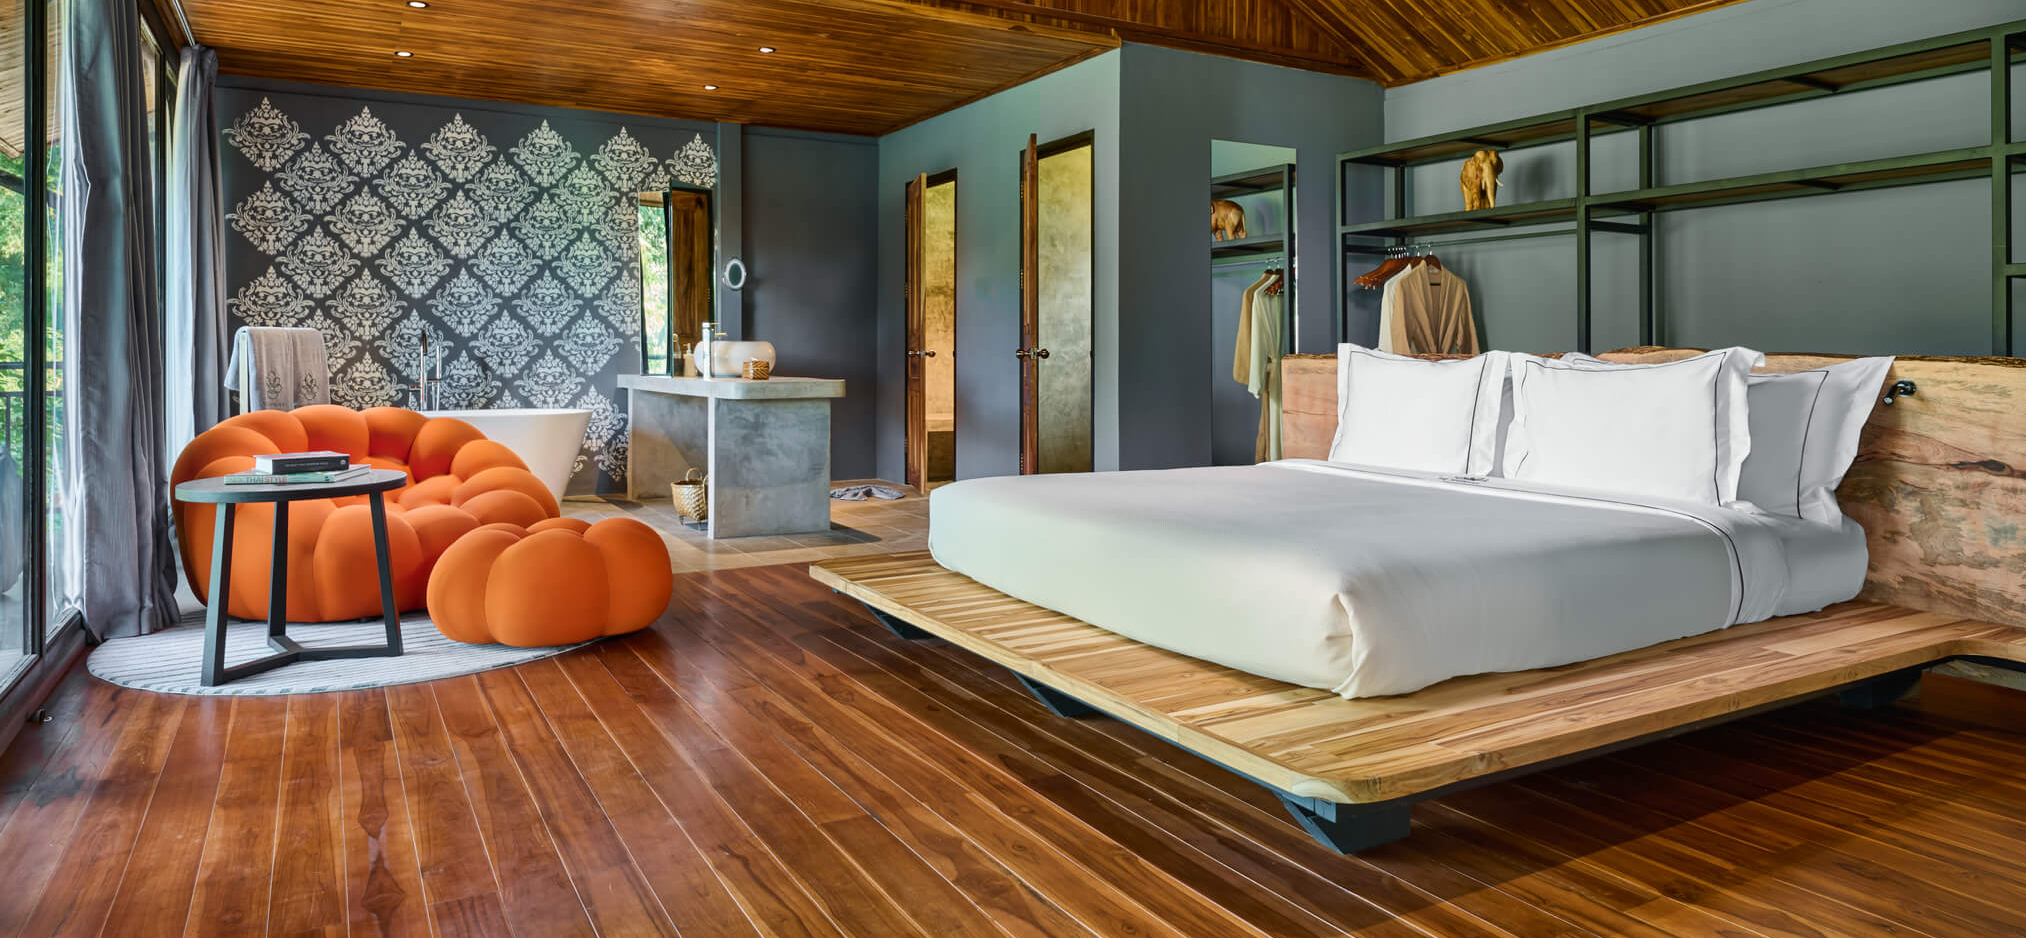 A luang prabang-inspired bedroom with wooden floors and a bed.